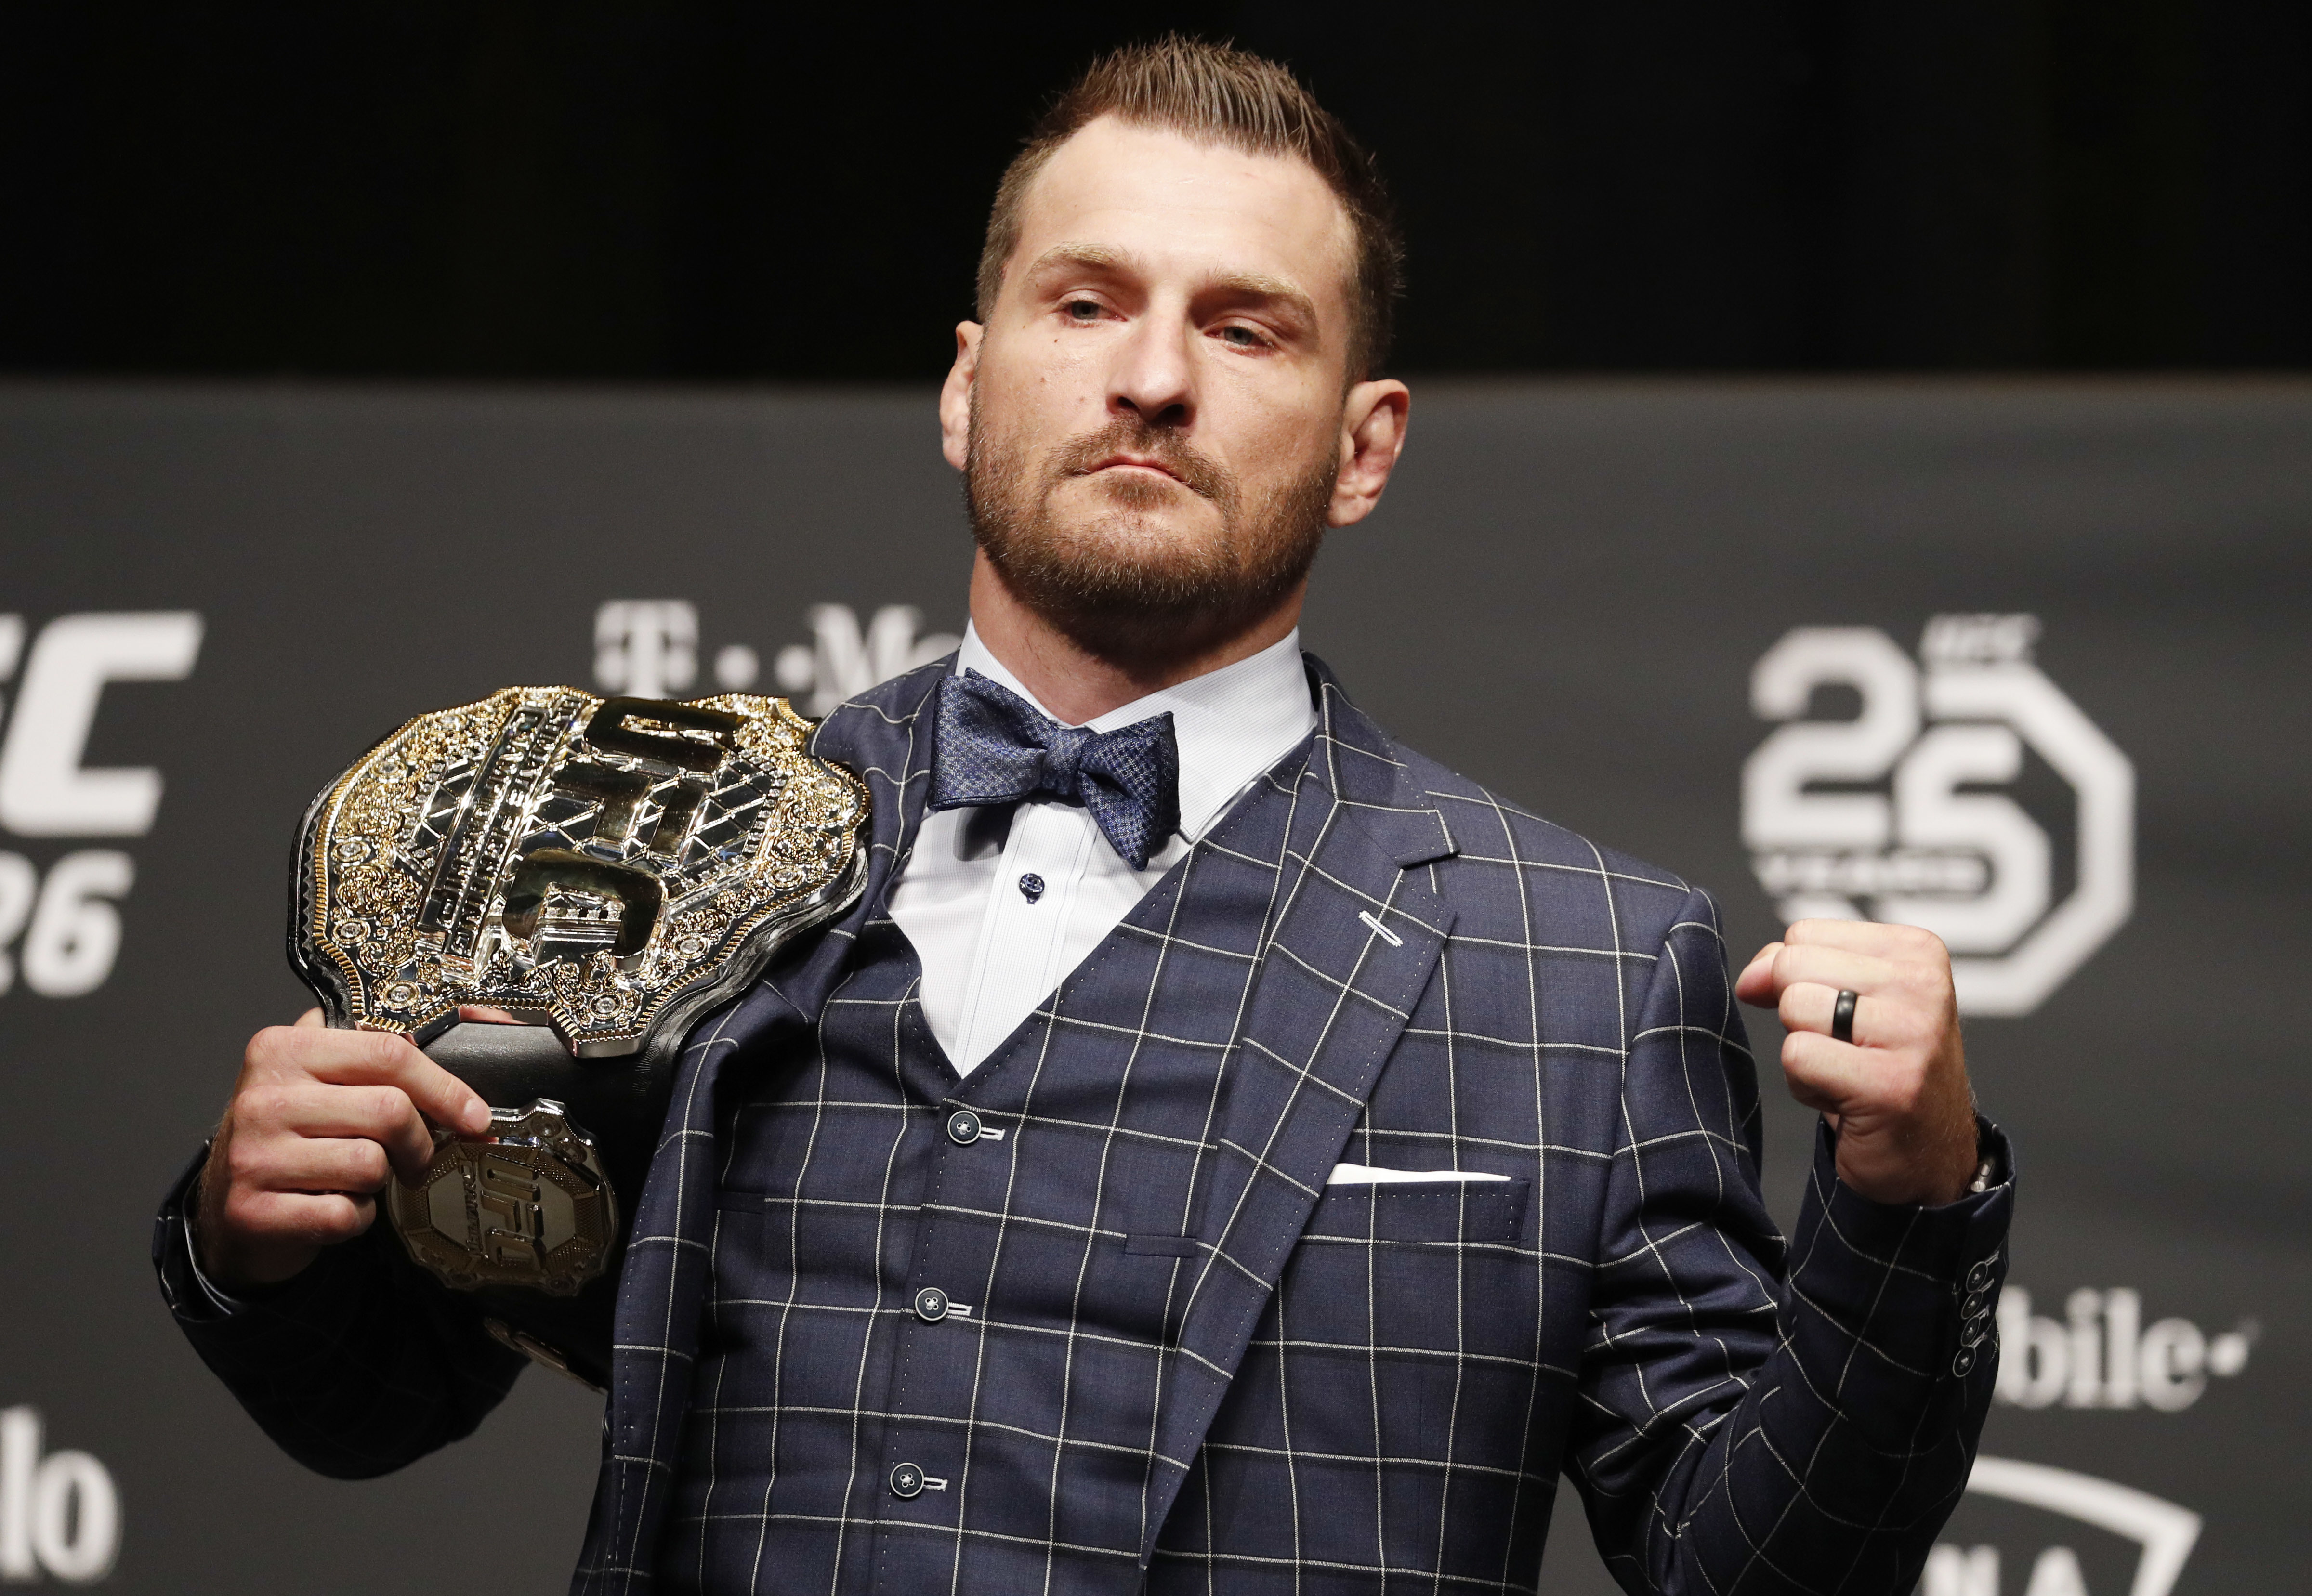 UFC champion Stipe Miocic plans to add more title belts to his trophy case